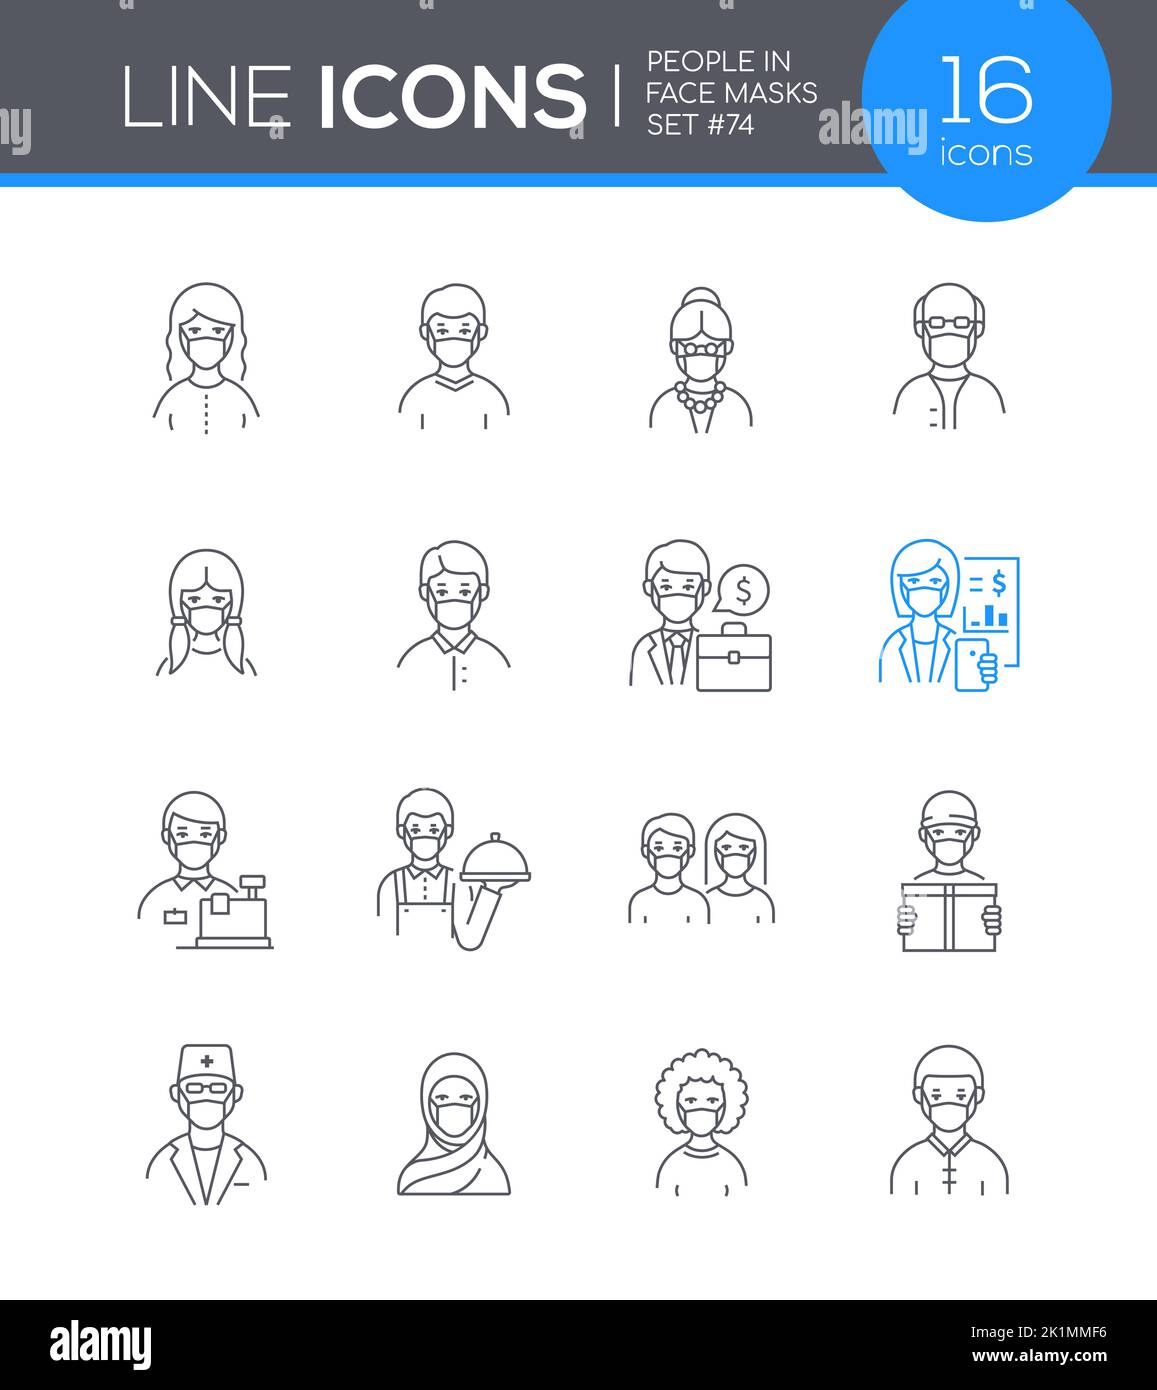 People in face masks - modern line design style icon set Stock Vector